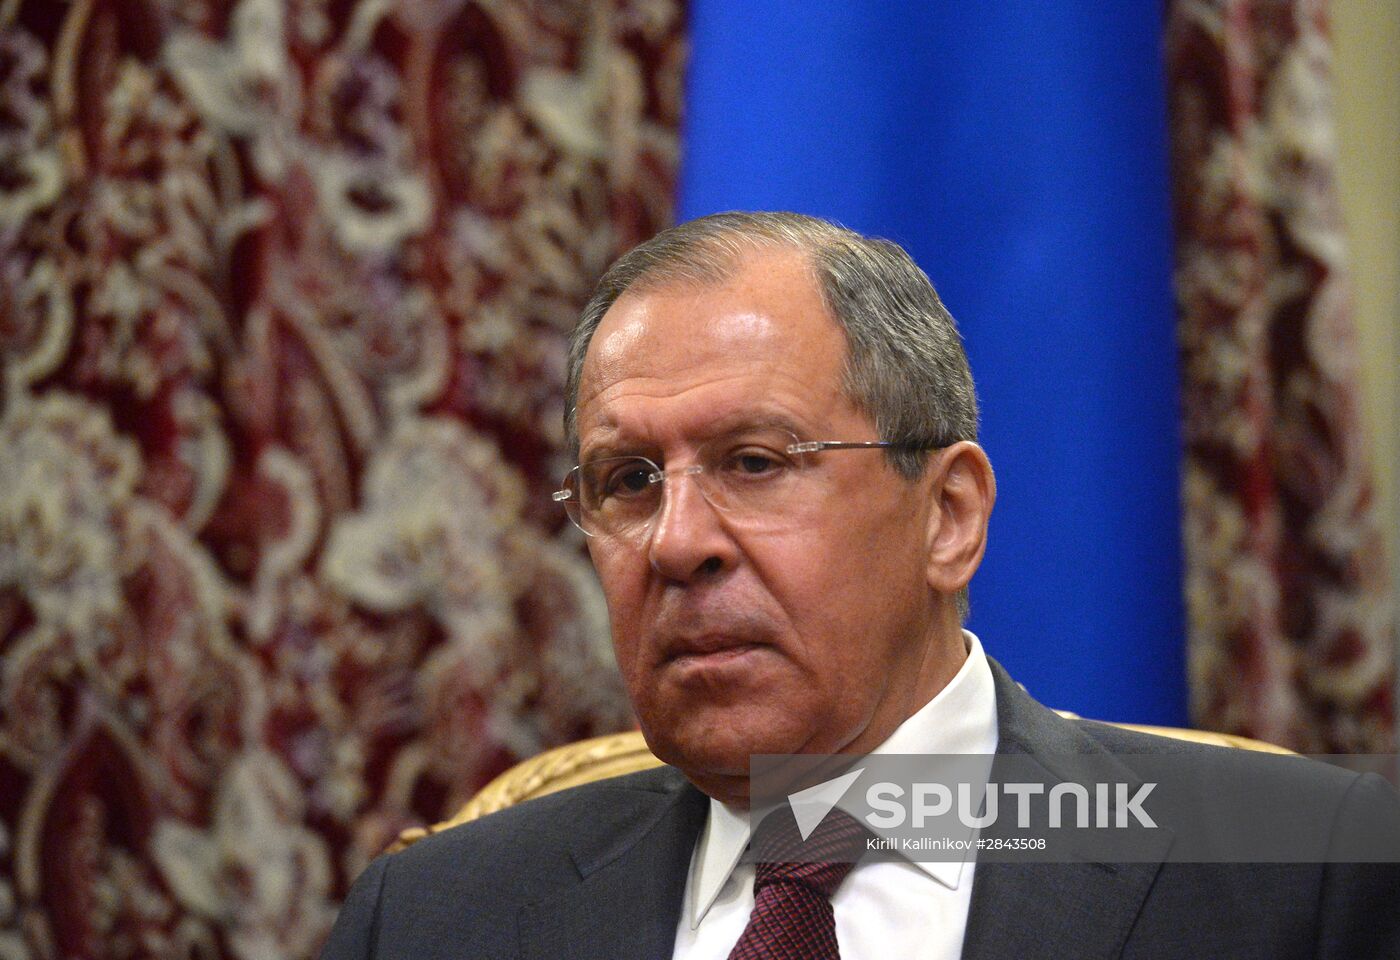 Events involving Russian Foreign Minister Sergei Lavrov